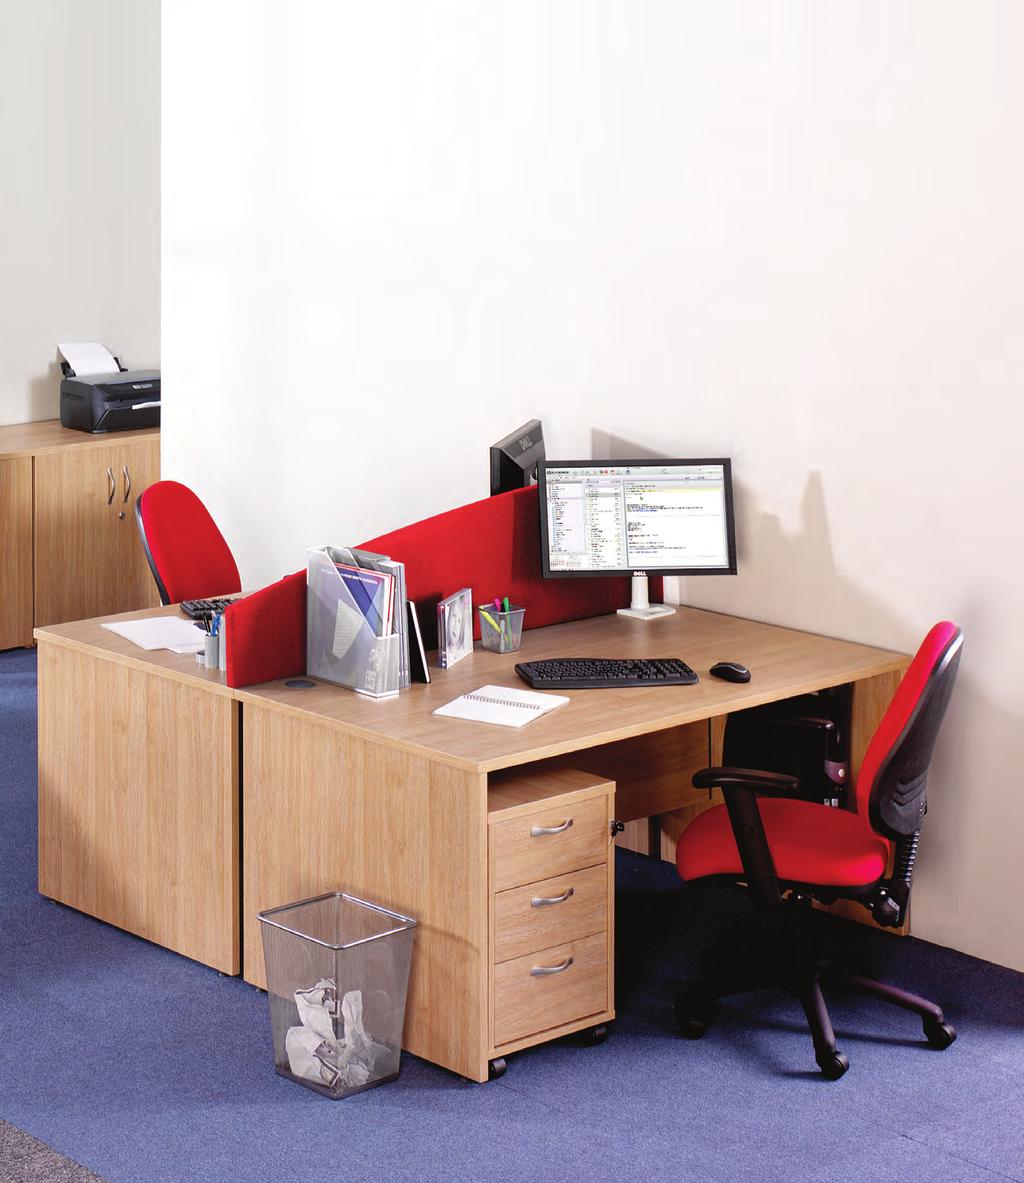 bout Maestro 25 PL Maestro 25 PL is a traditional panel end desk design comprising of 25mm thick MF desk tops and panel end legs.